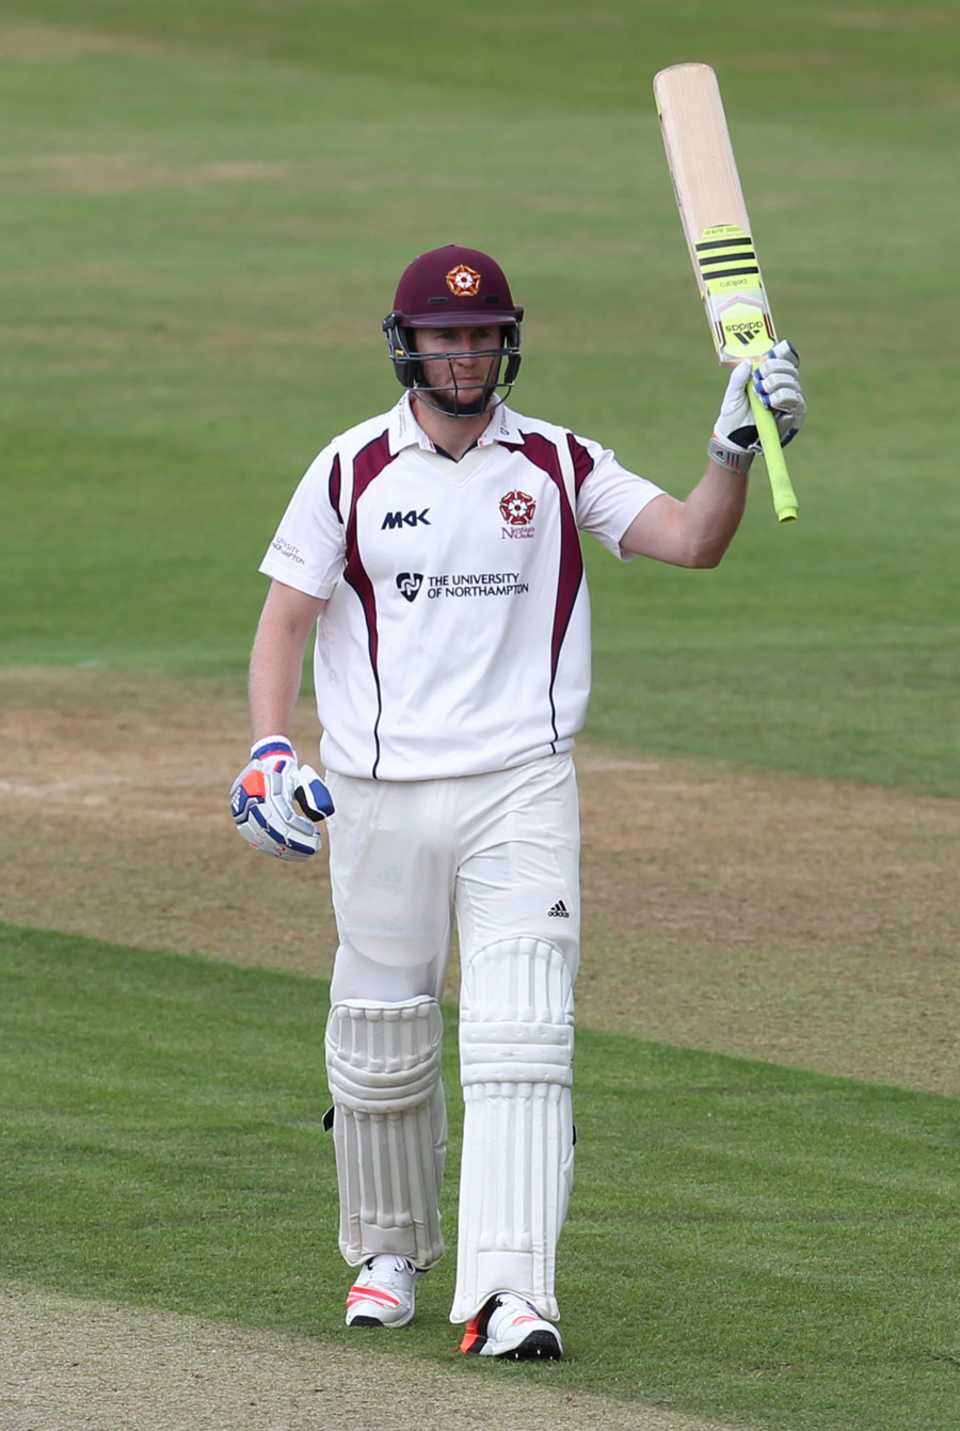 Alex Wakely recorded his fourth first-class hundred